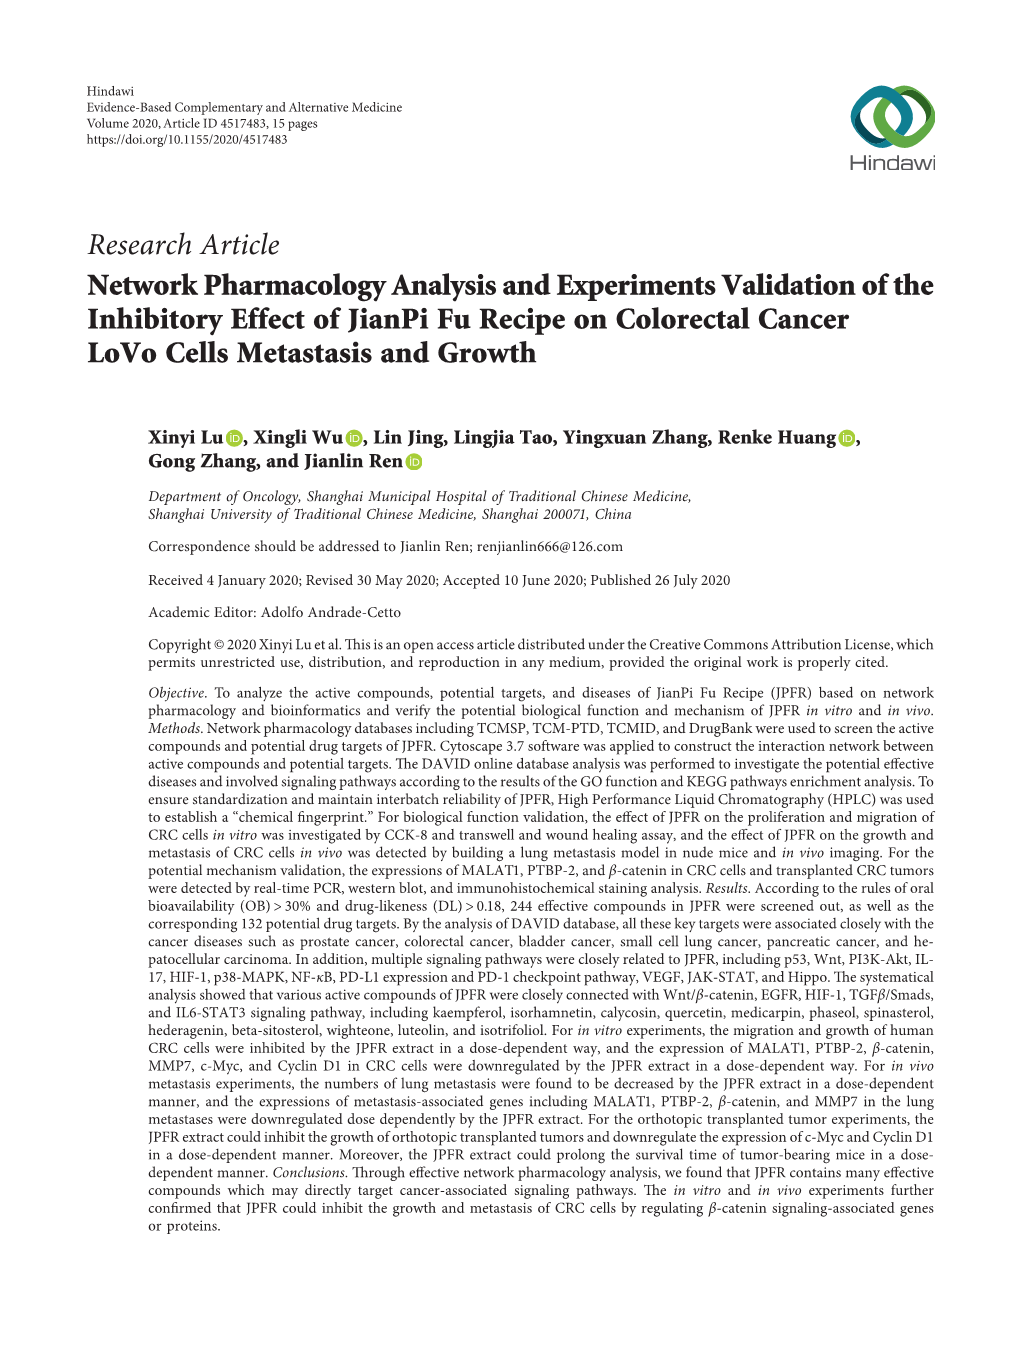 Network Pharmacology Analysis and Experiments Validation of the Inhibitory Effect of Jianpi Fu Recipe on Colorectal Cancer Lovo Cells Metastasis and Growth